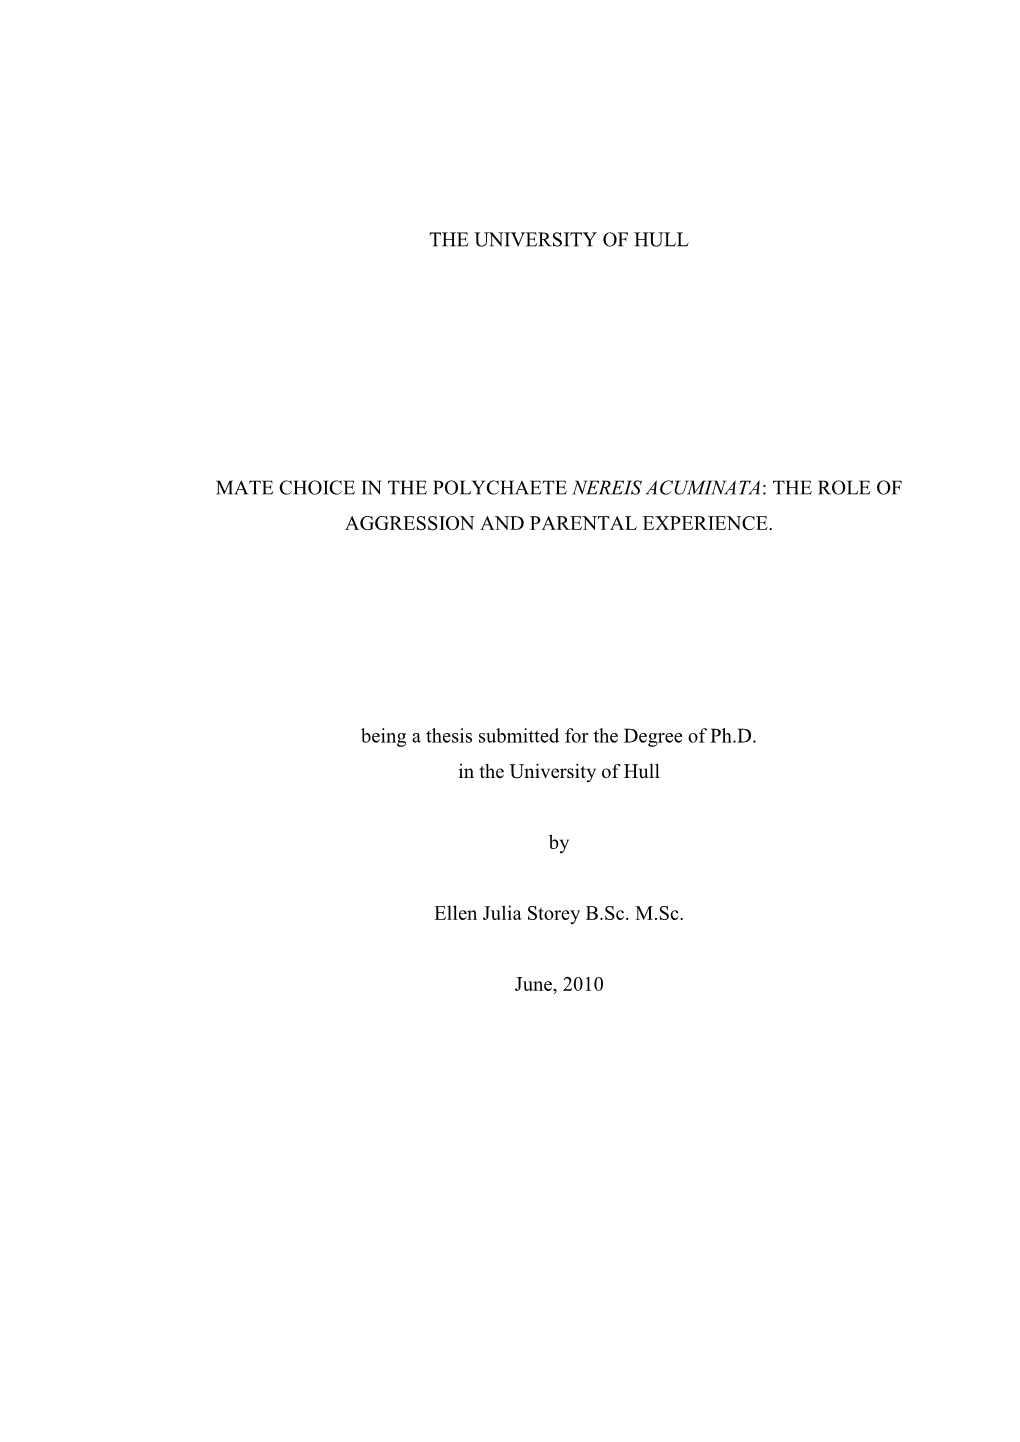 Thesis Submitted for the Degree of Ph.D